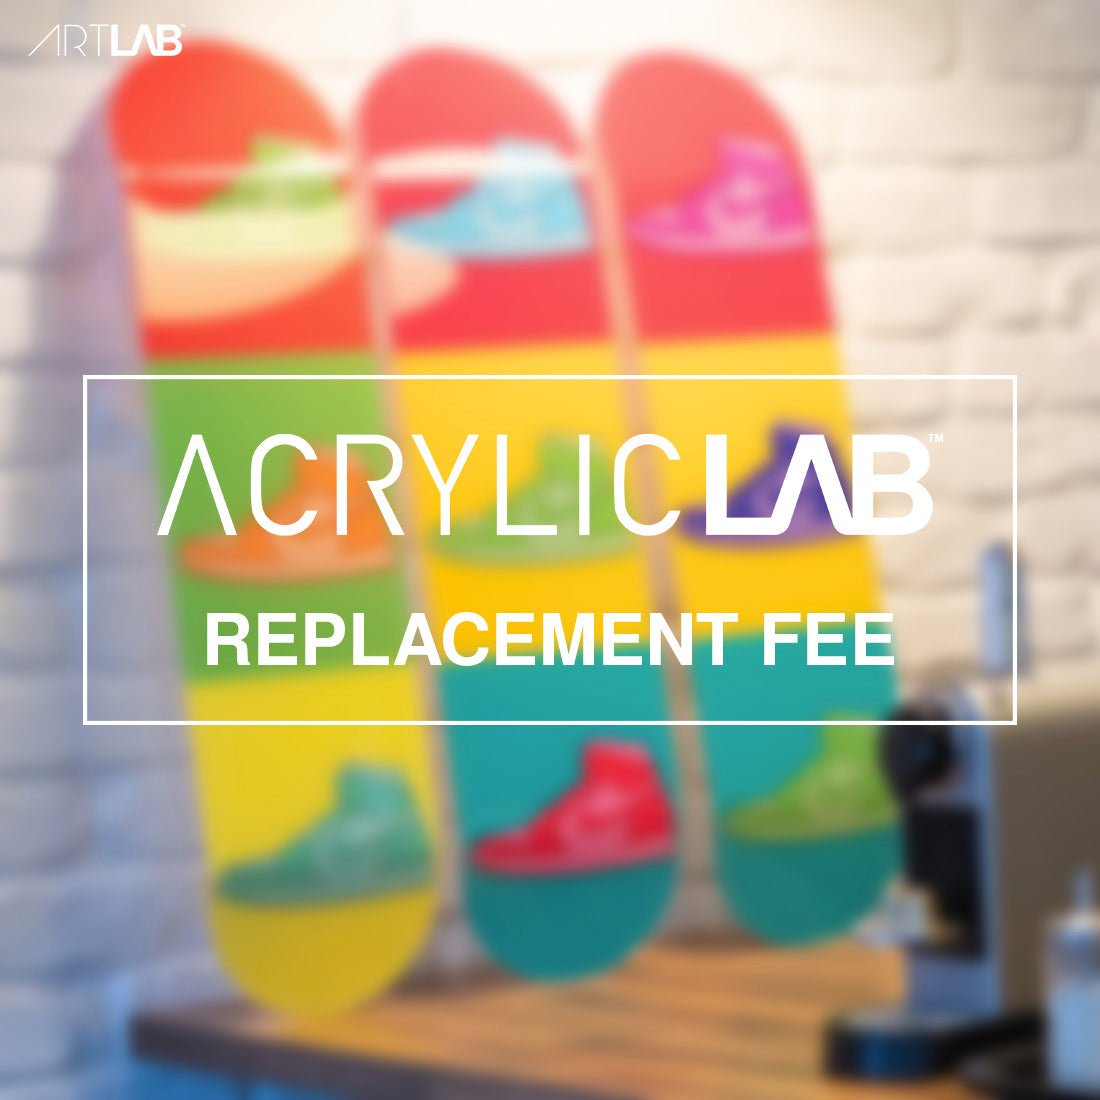 ACRYLIC Replacement Fee